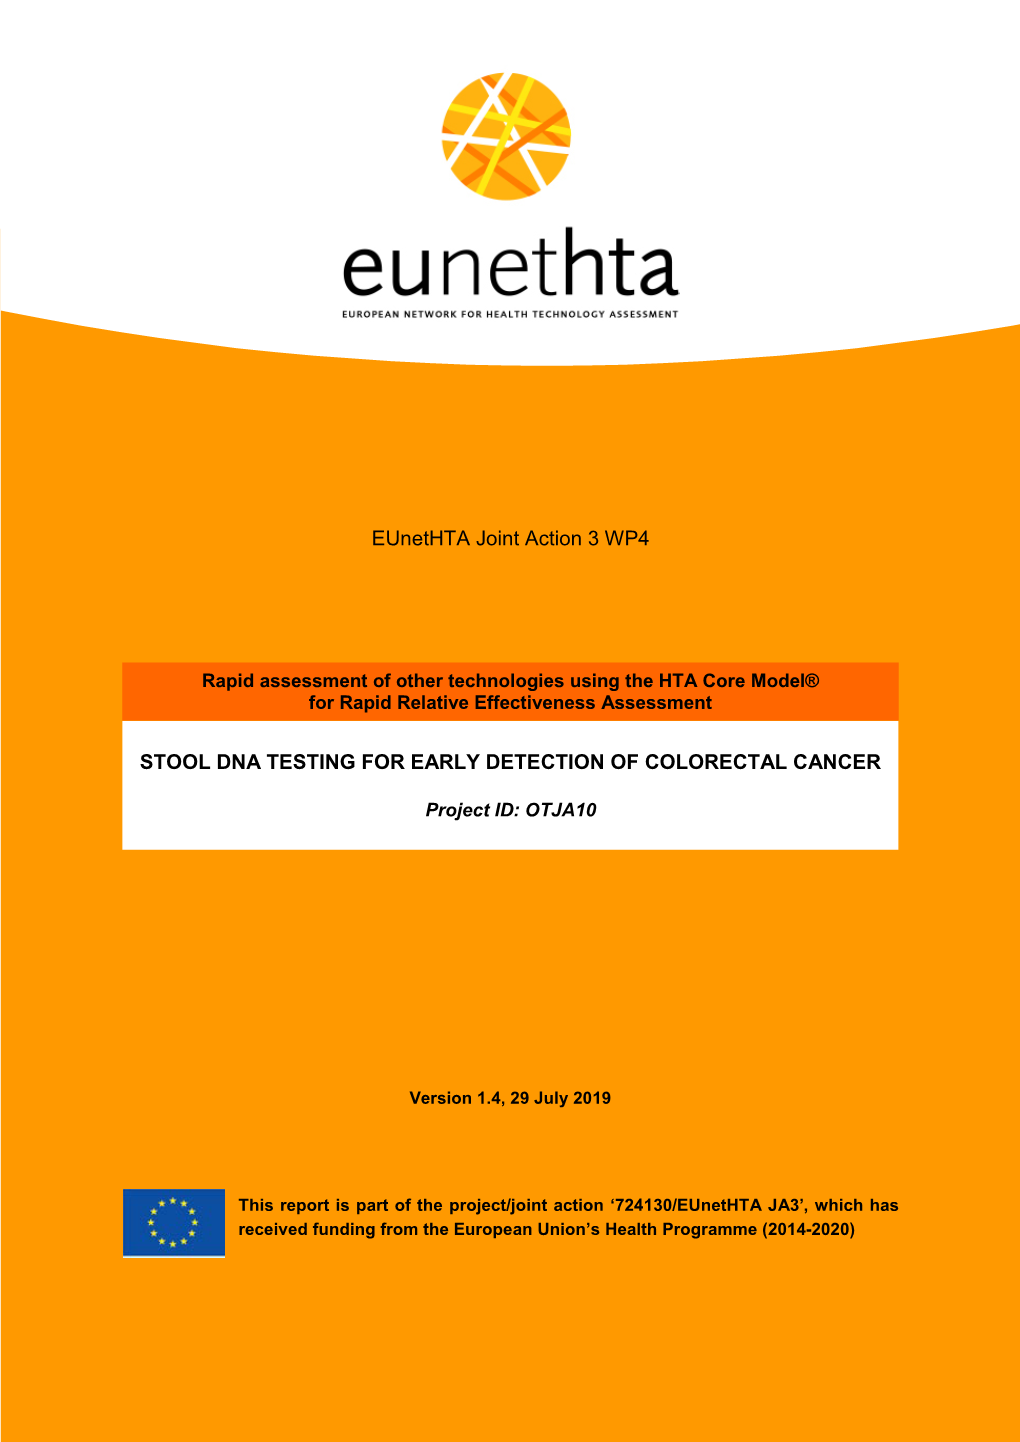 Eunethta Joint Action 3 WP4 STOOL DNA TESTING for EARLY DETECTION of COLORECTAL CANCER